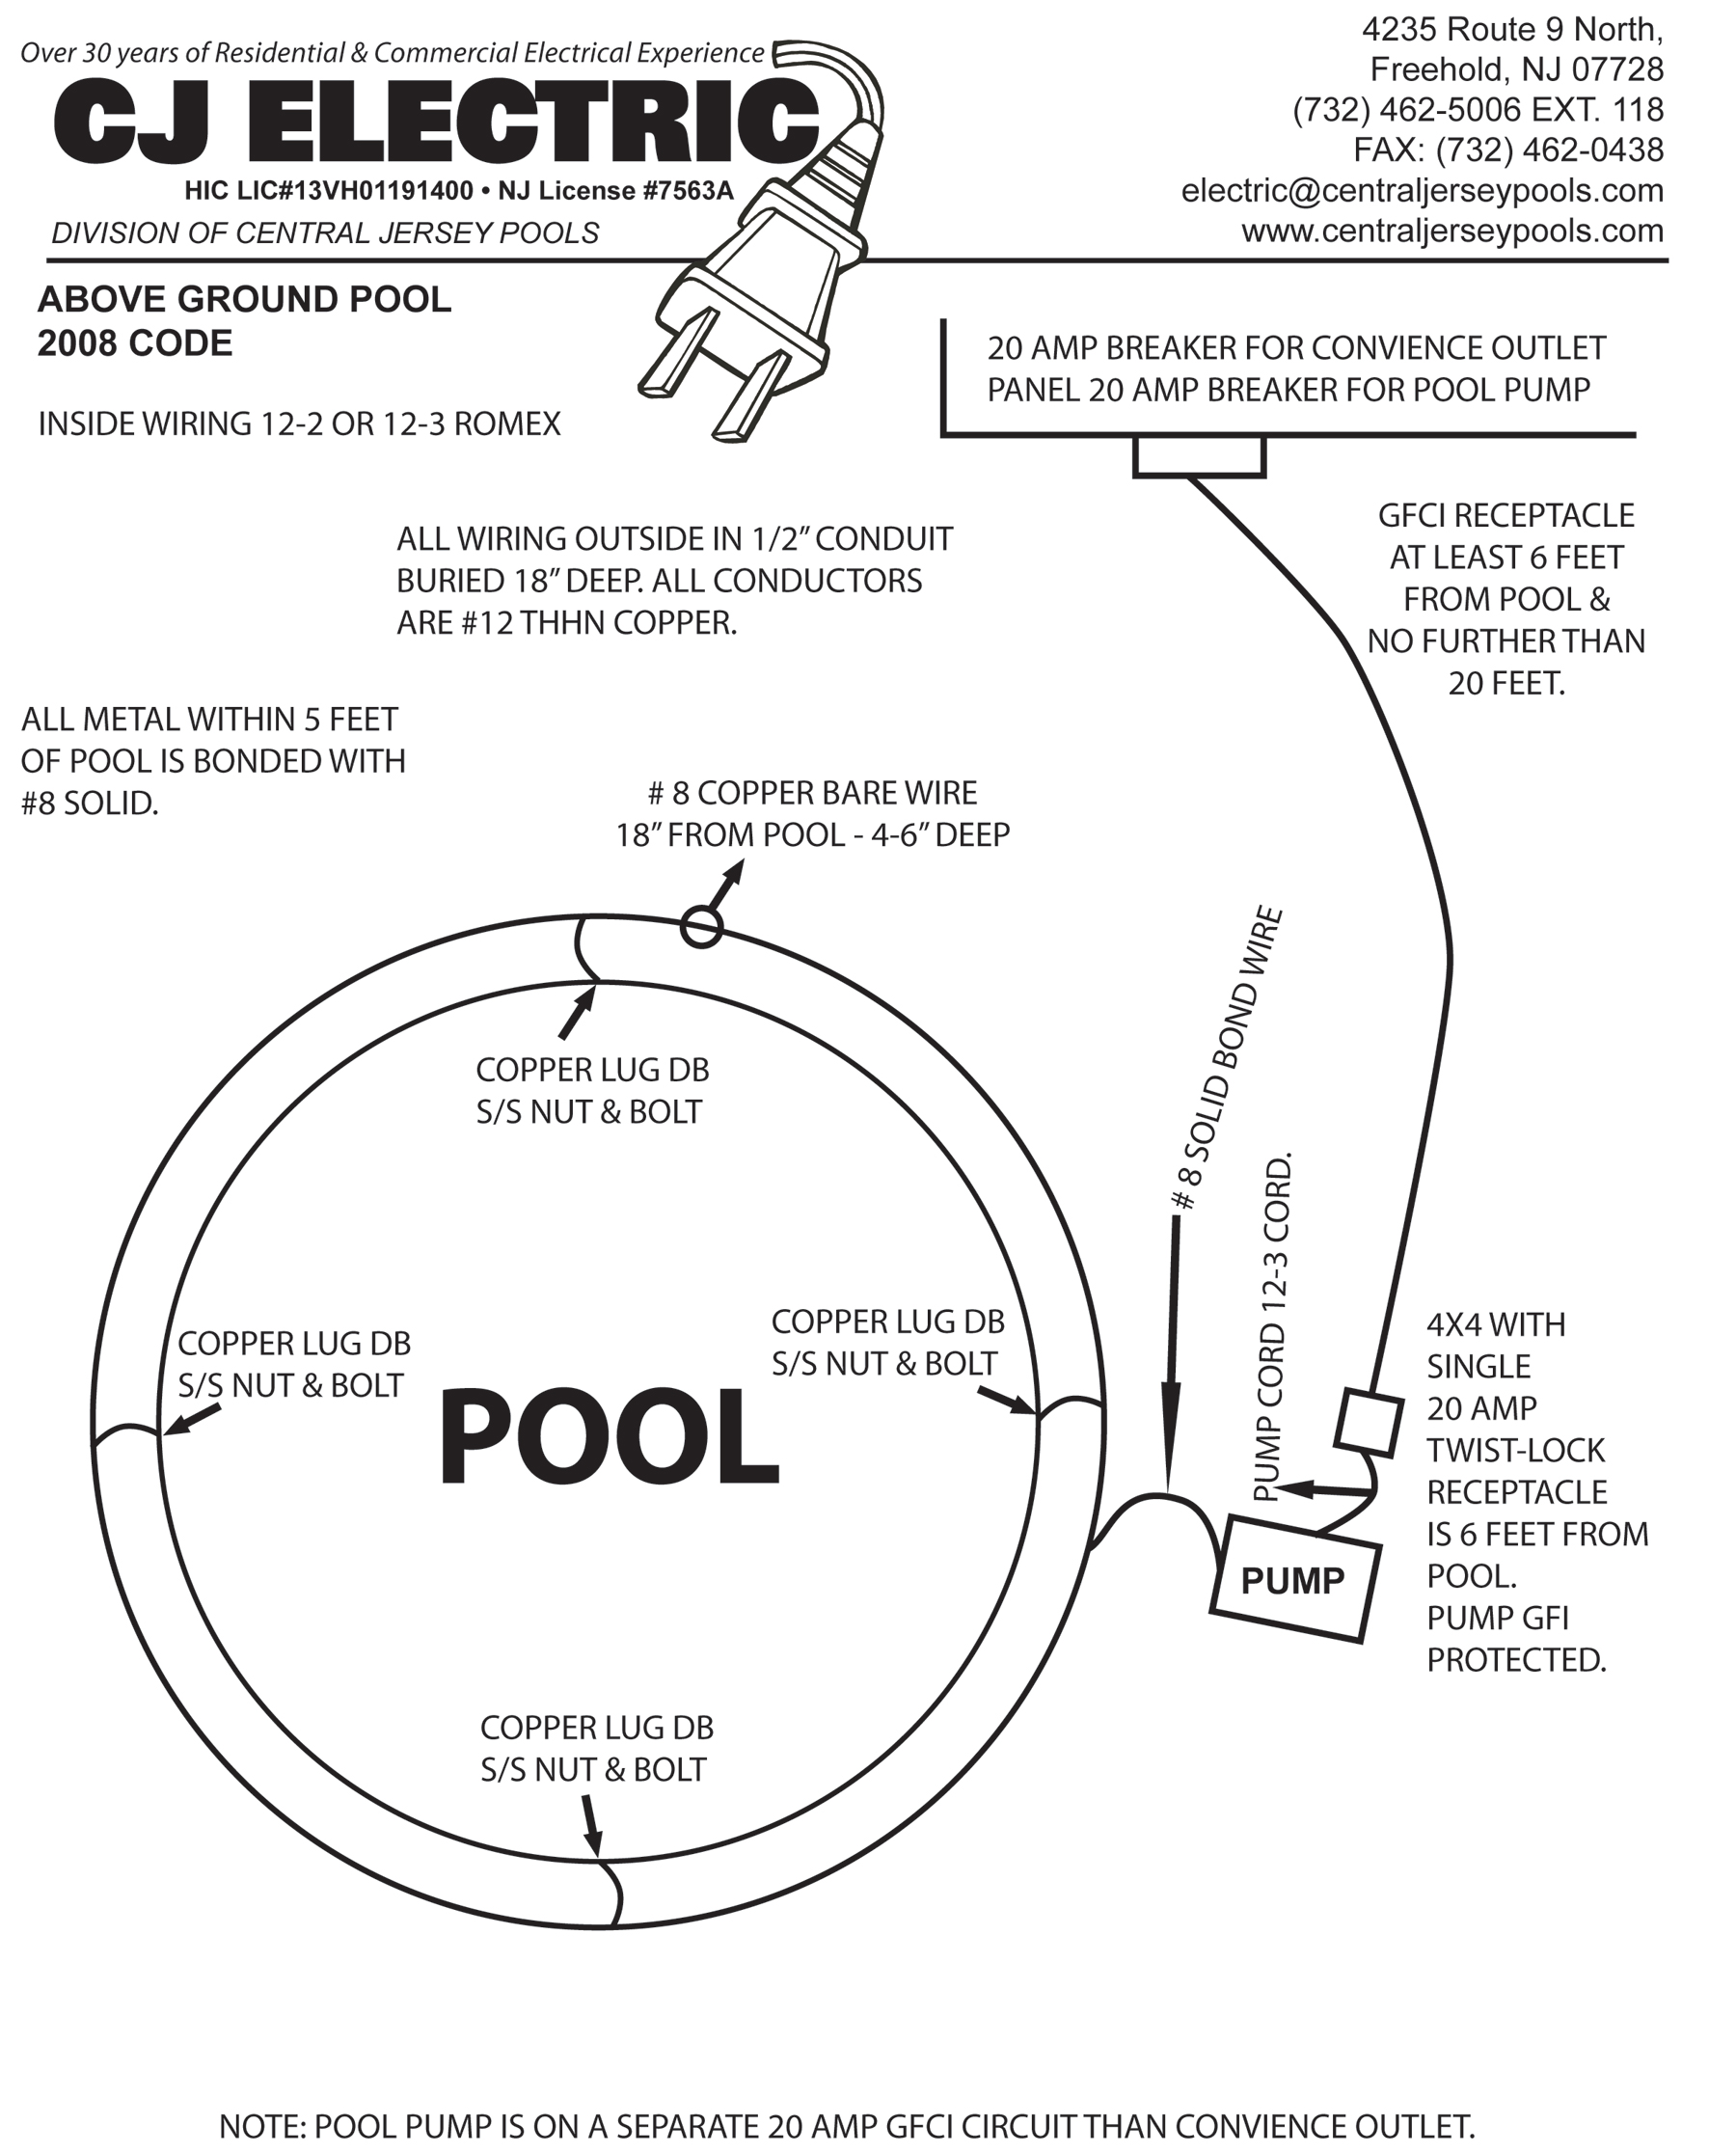 Central Jersey Pools Pool Permit Diagram 2010